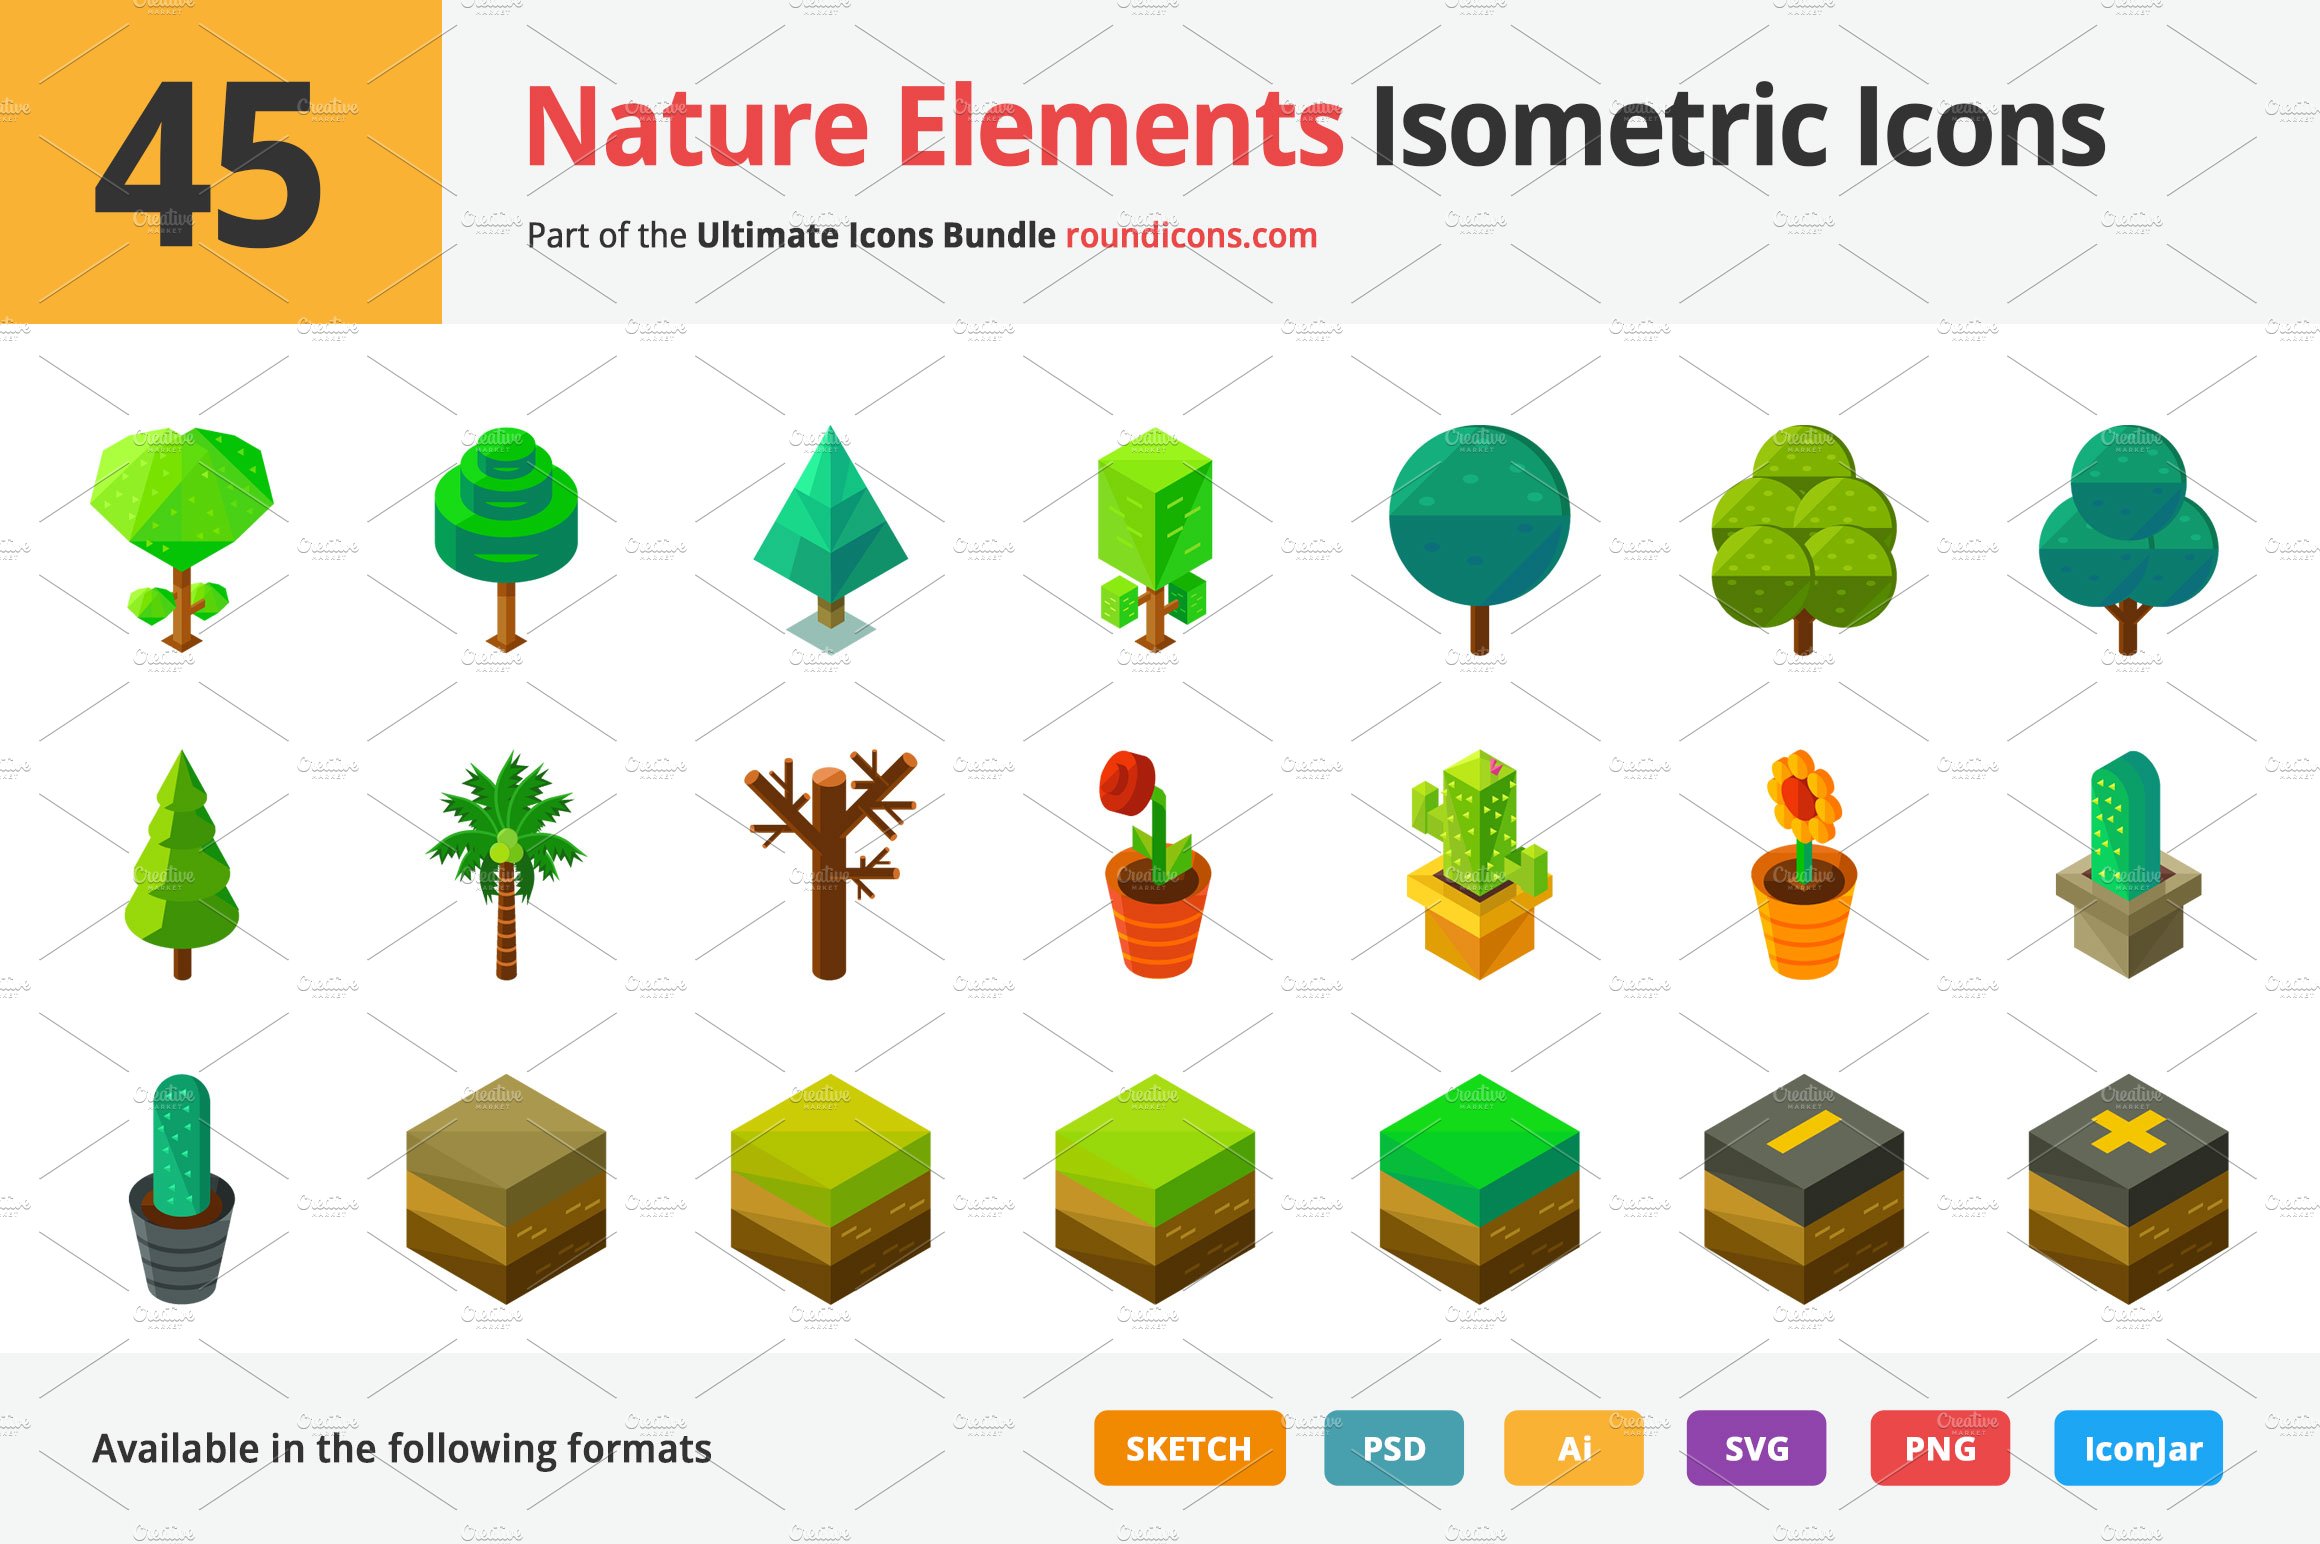 45 Nature Elements Isometric Icons cover image.